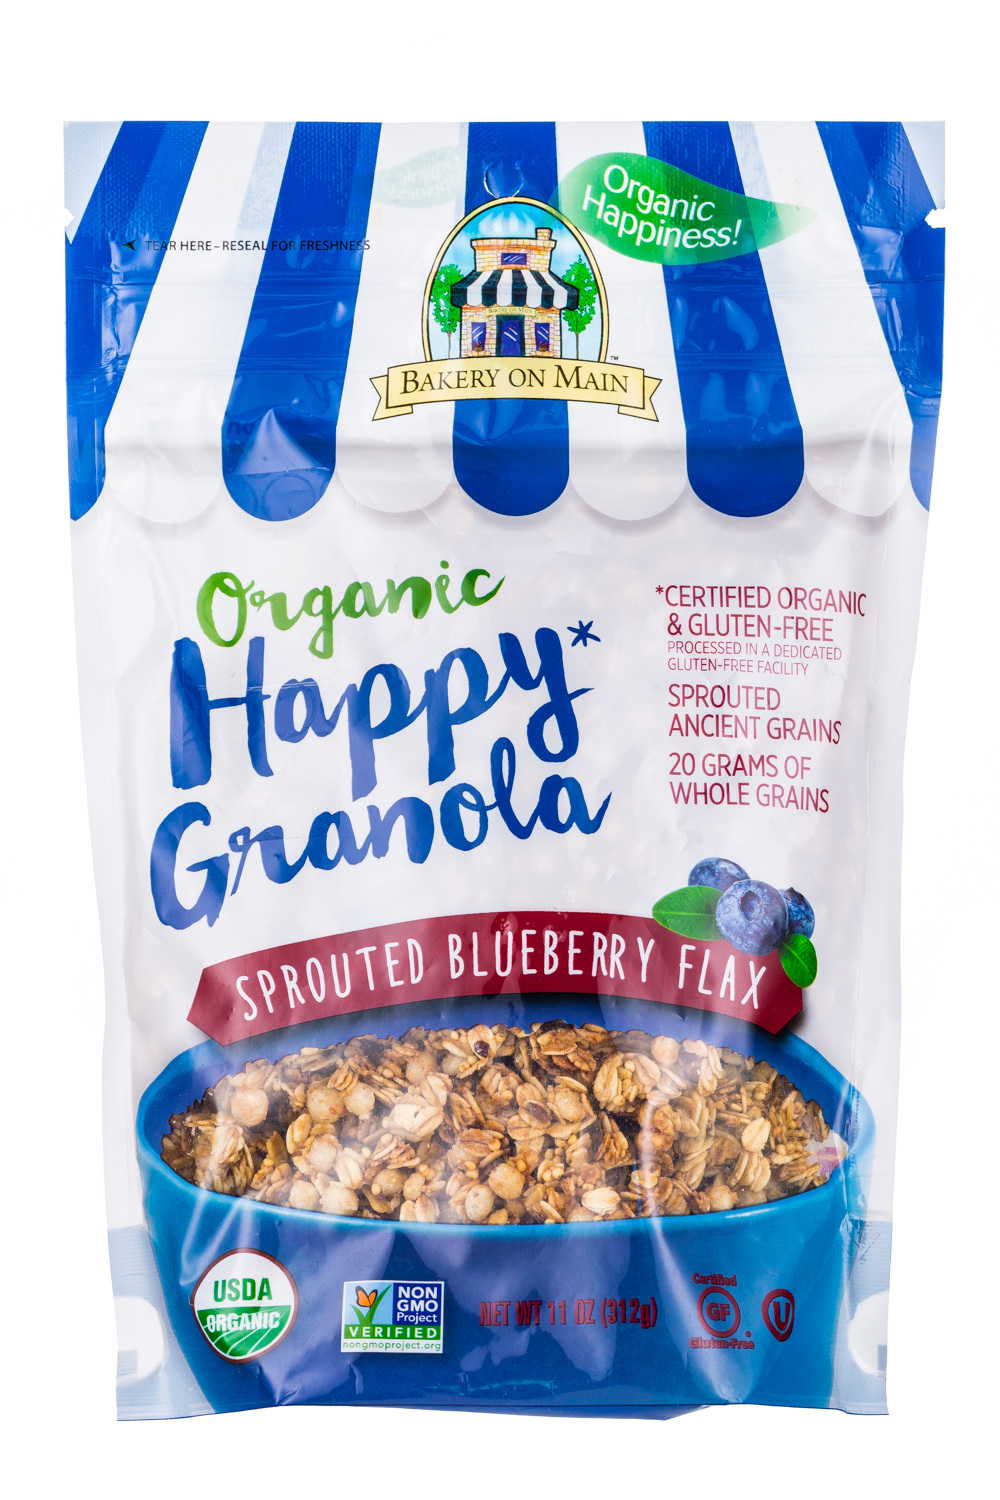 Organic Happy Granola: Sprouted Blueberry Flax